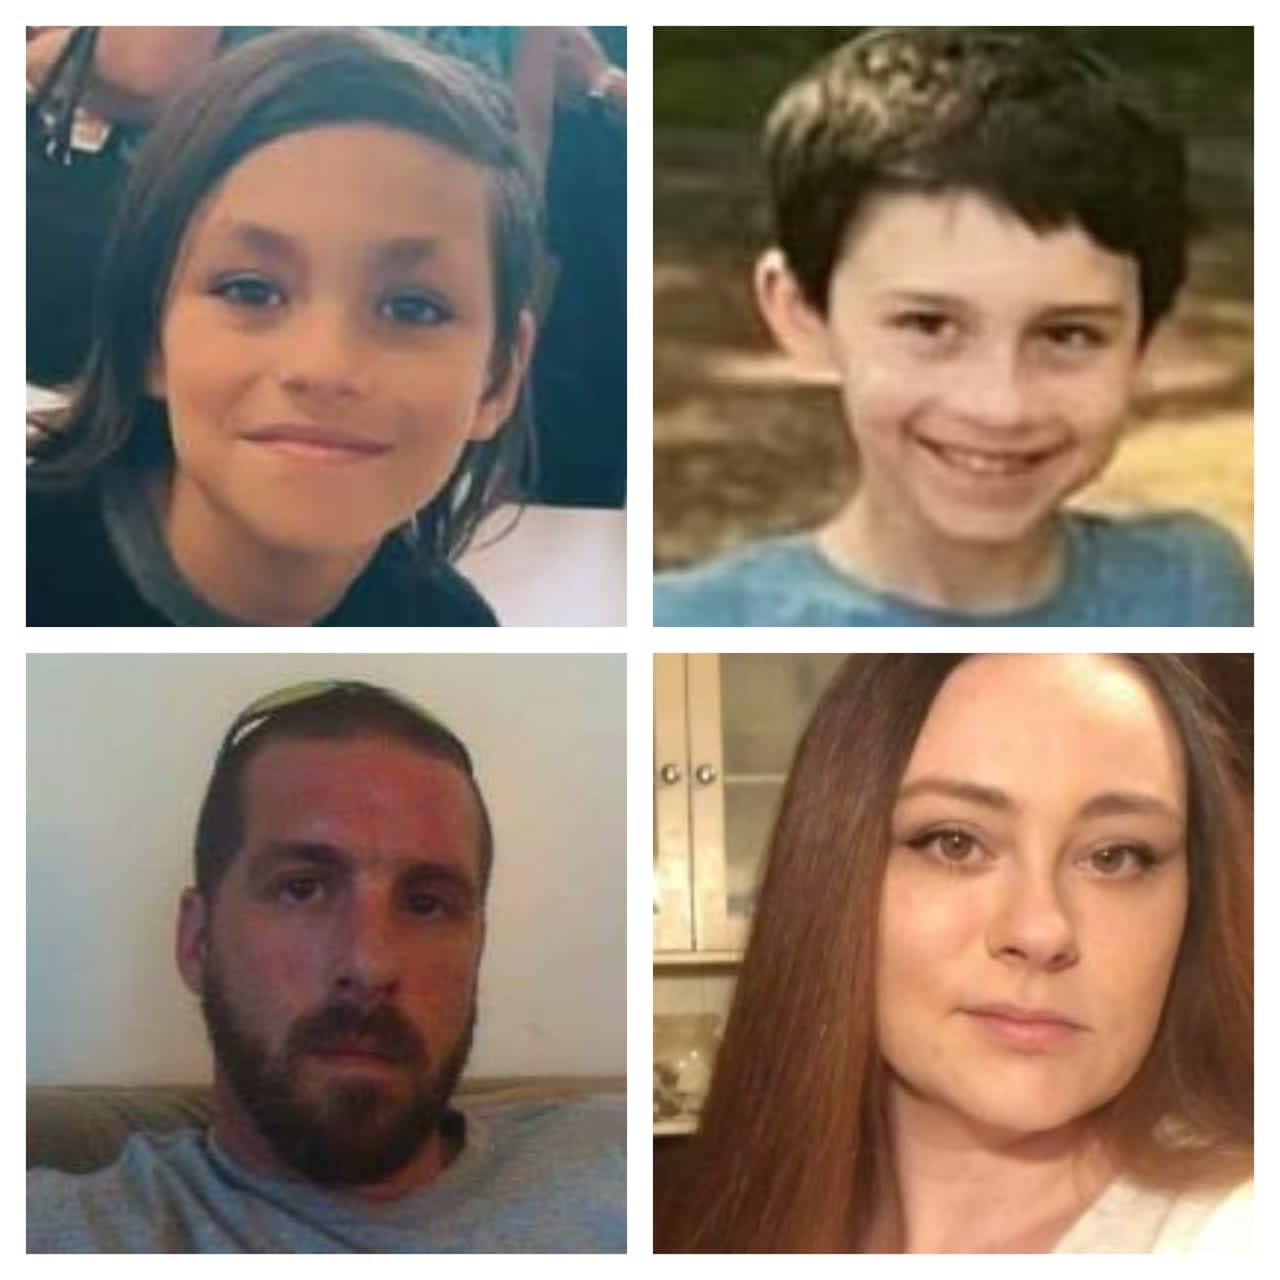 Have You Seen Them? From left: Kevin Qualters, Aiden Qualters, Kevin J. Qualters, and Kristen Cullen